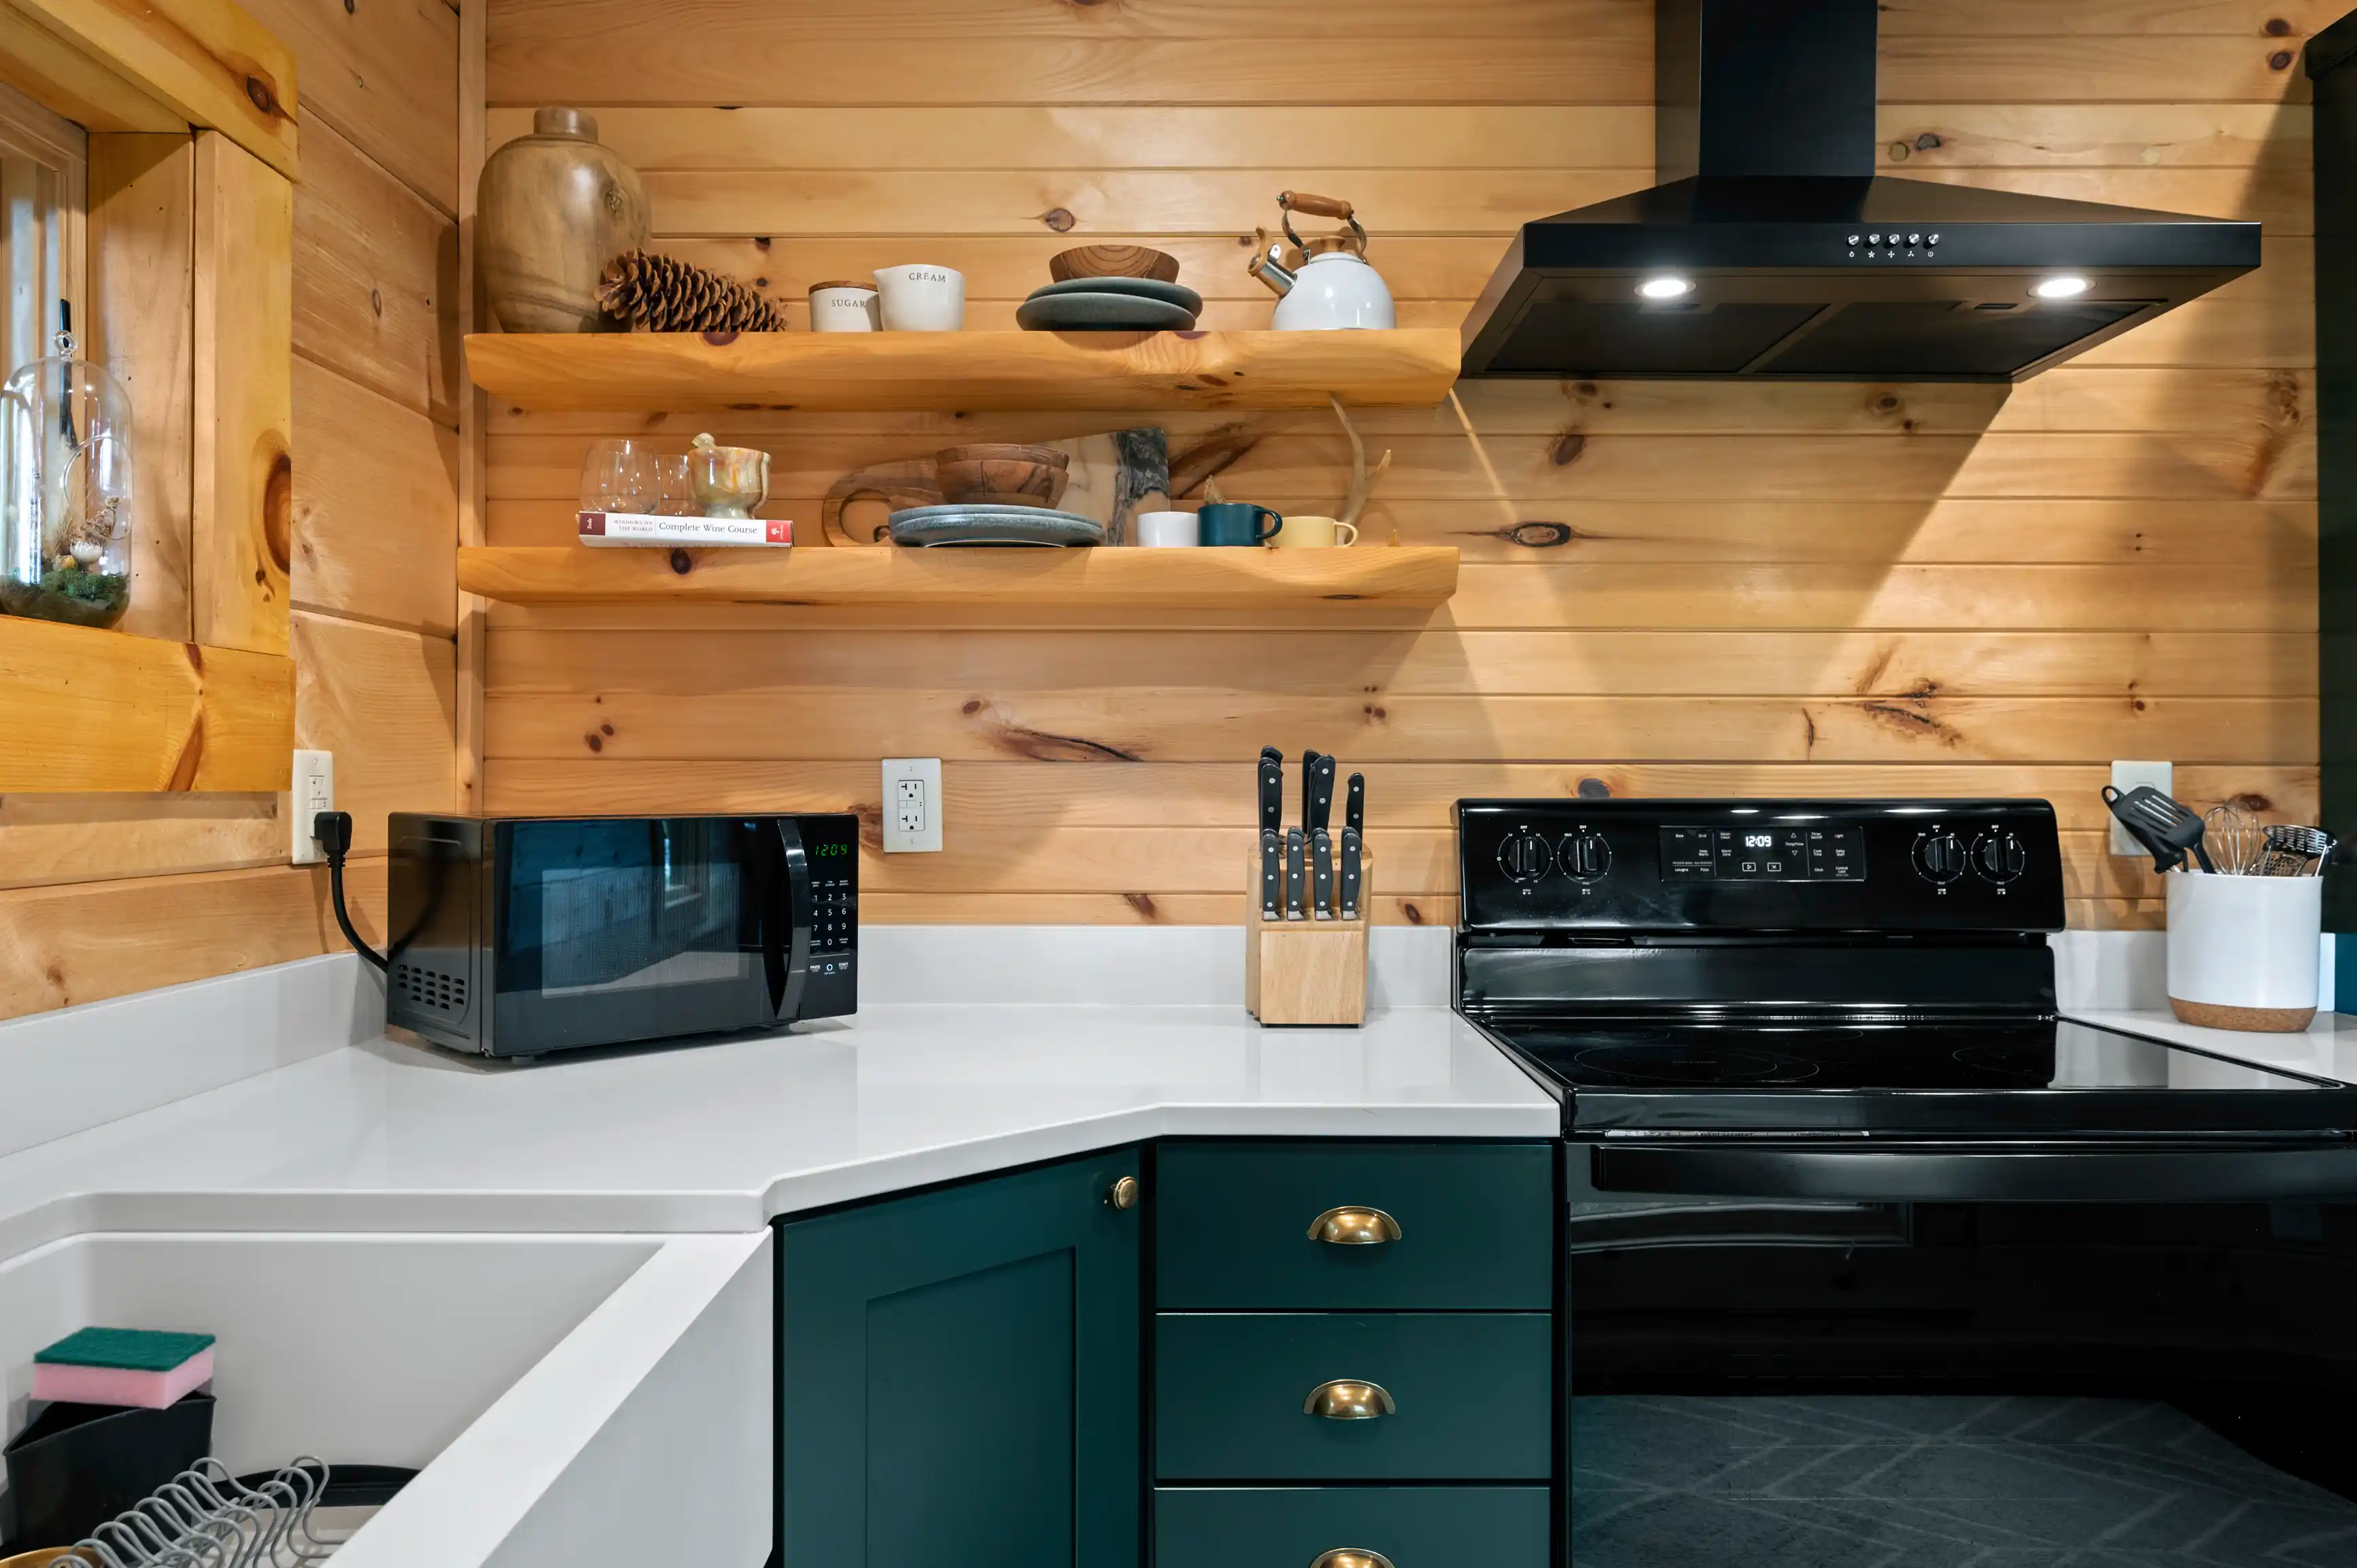 Modern kitchen interior with wooden walls and green cabinets, featuring a microwave, a stove, floating shelves with dishes, and cooking utensils.